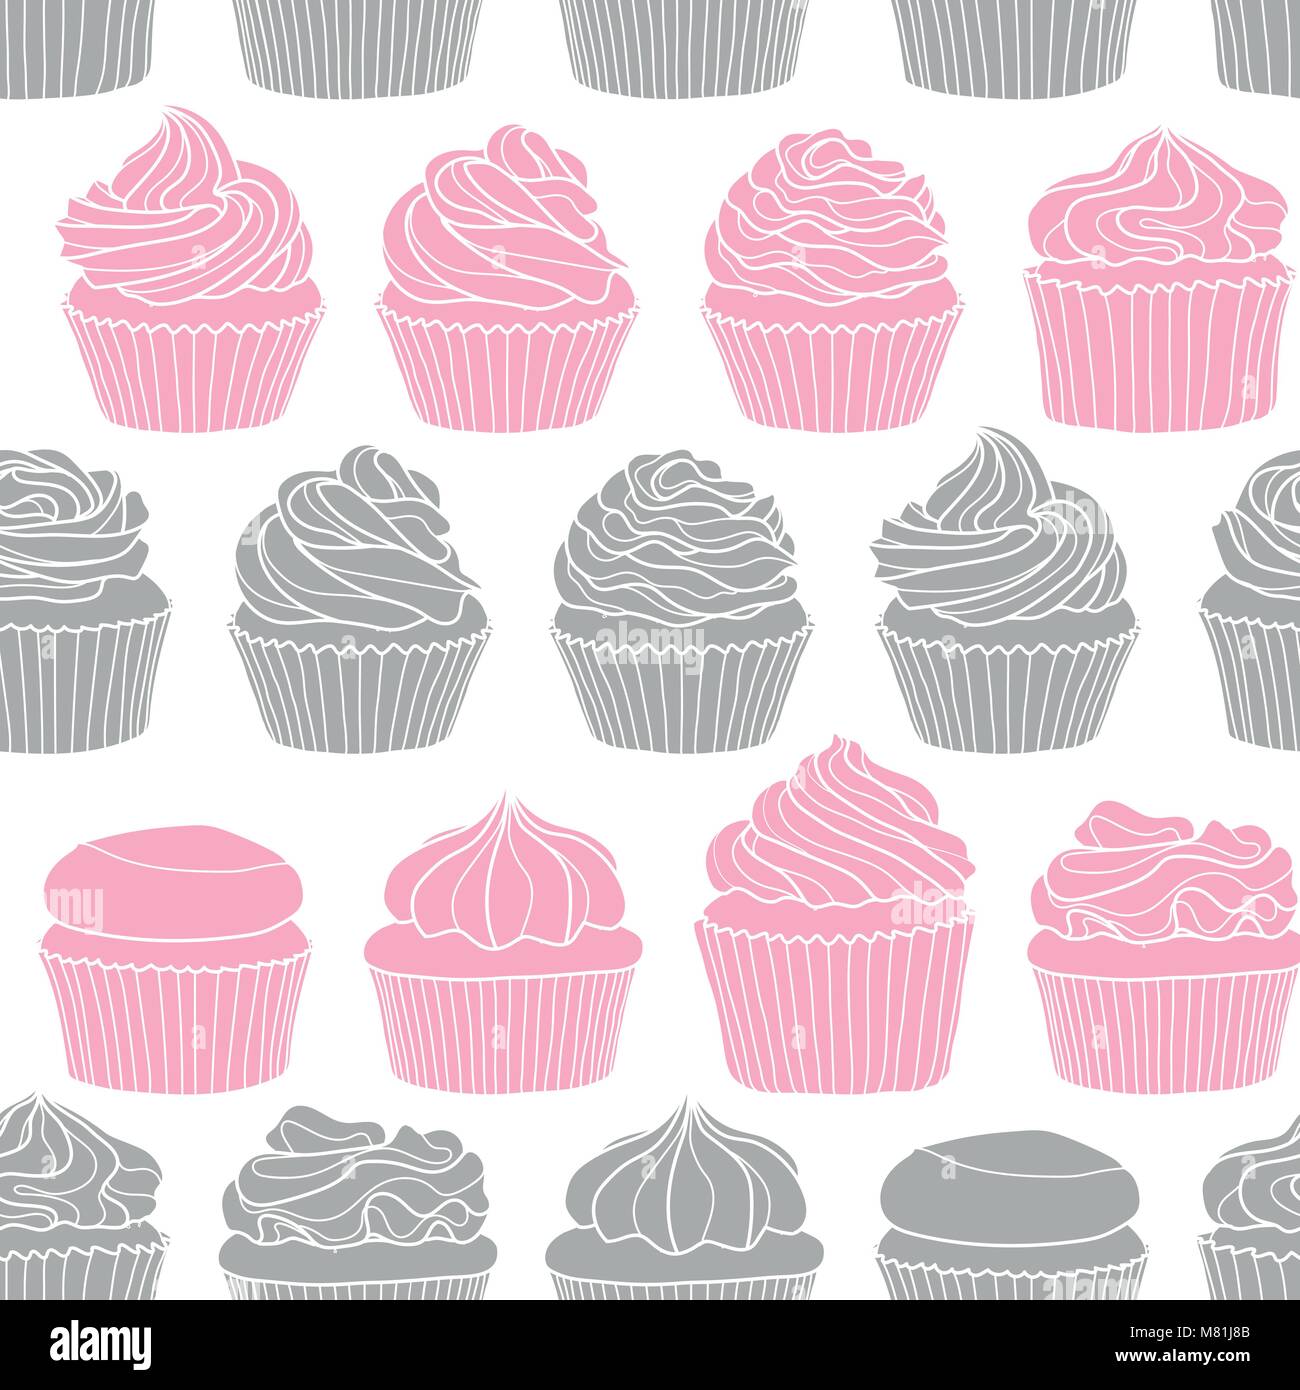 8 styles of cupcake on white background. Cute hand drawn seamless pattern of dessert in pastel pink and gray silhouette. Stock Vector